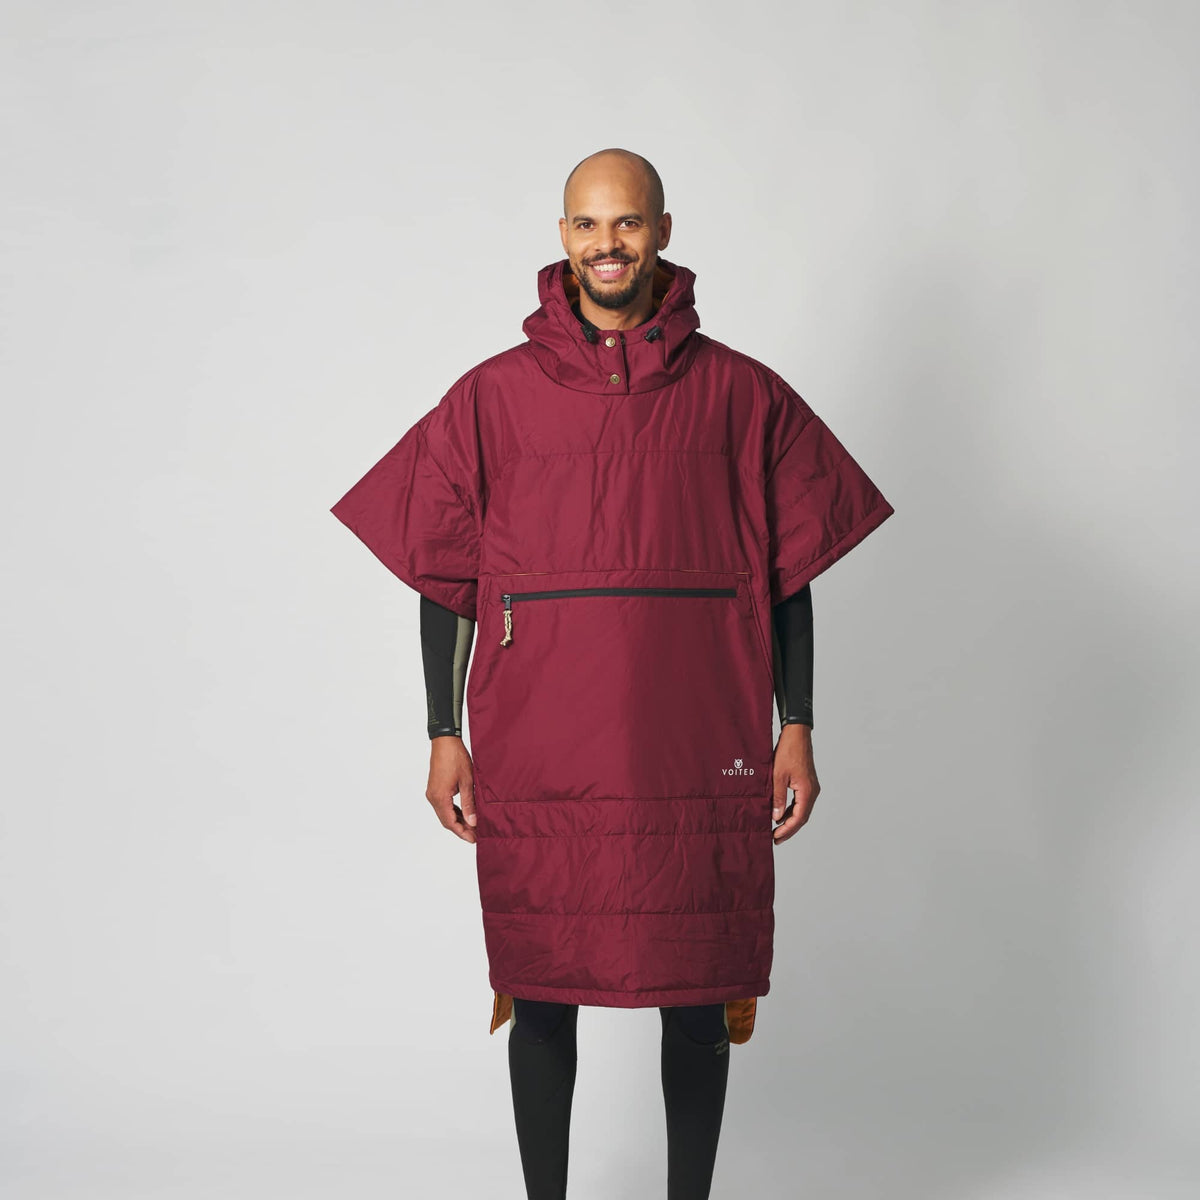 VOITED Outdoor Poncho for Surfing, Camping, Vanlife & Wild Swimming - Cardinal